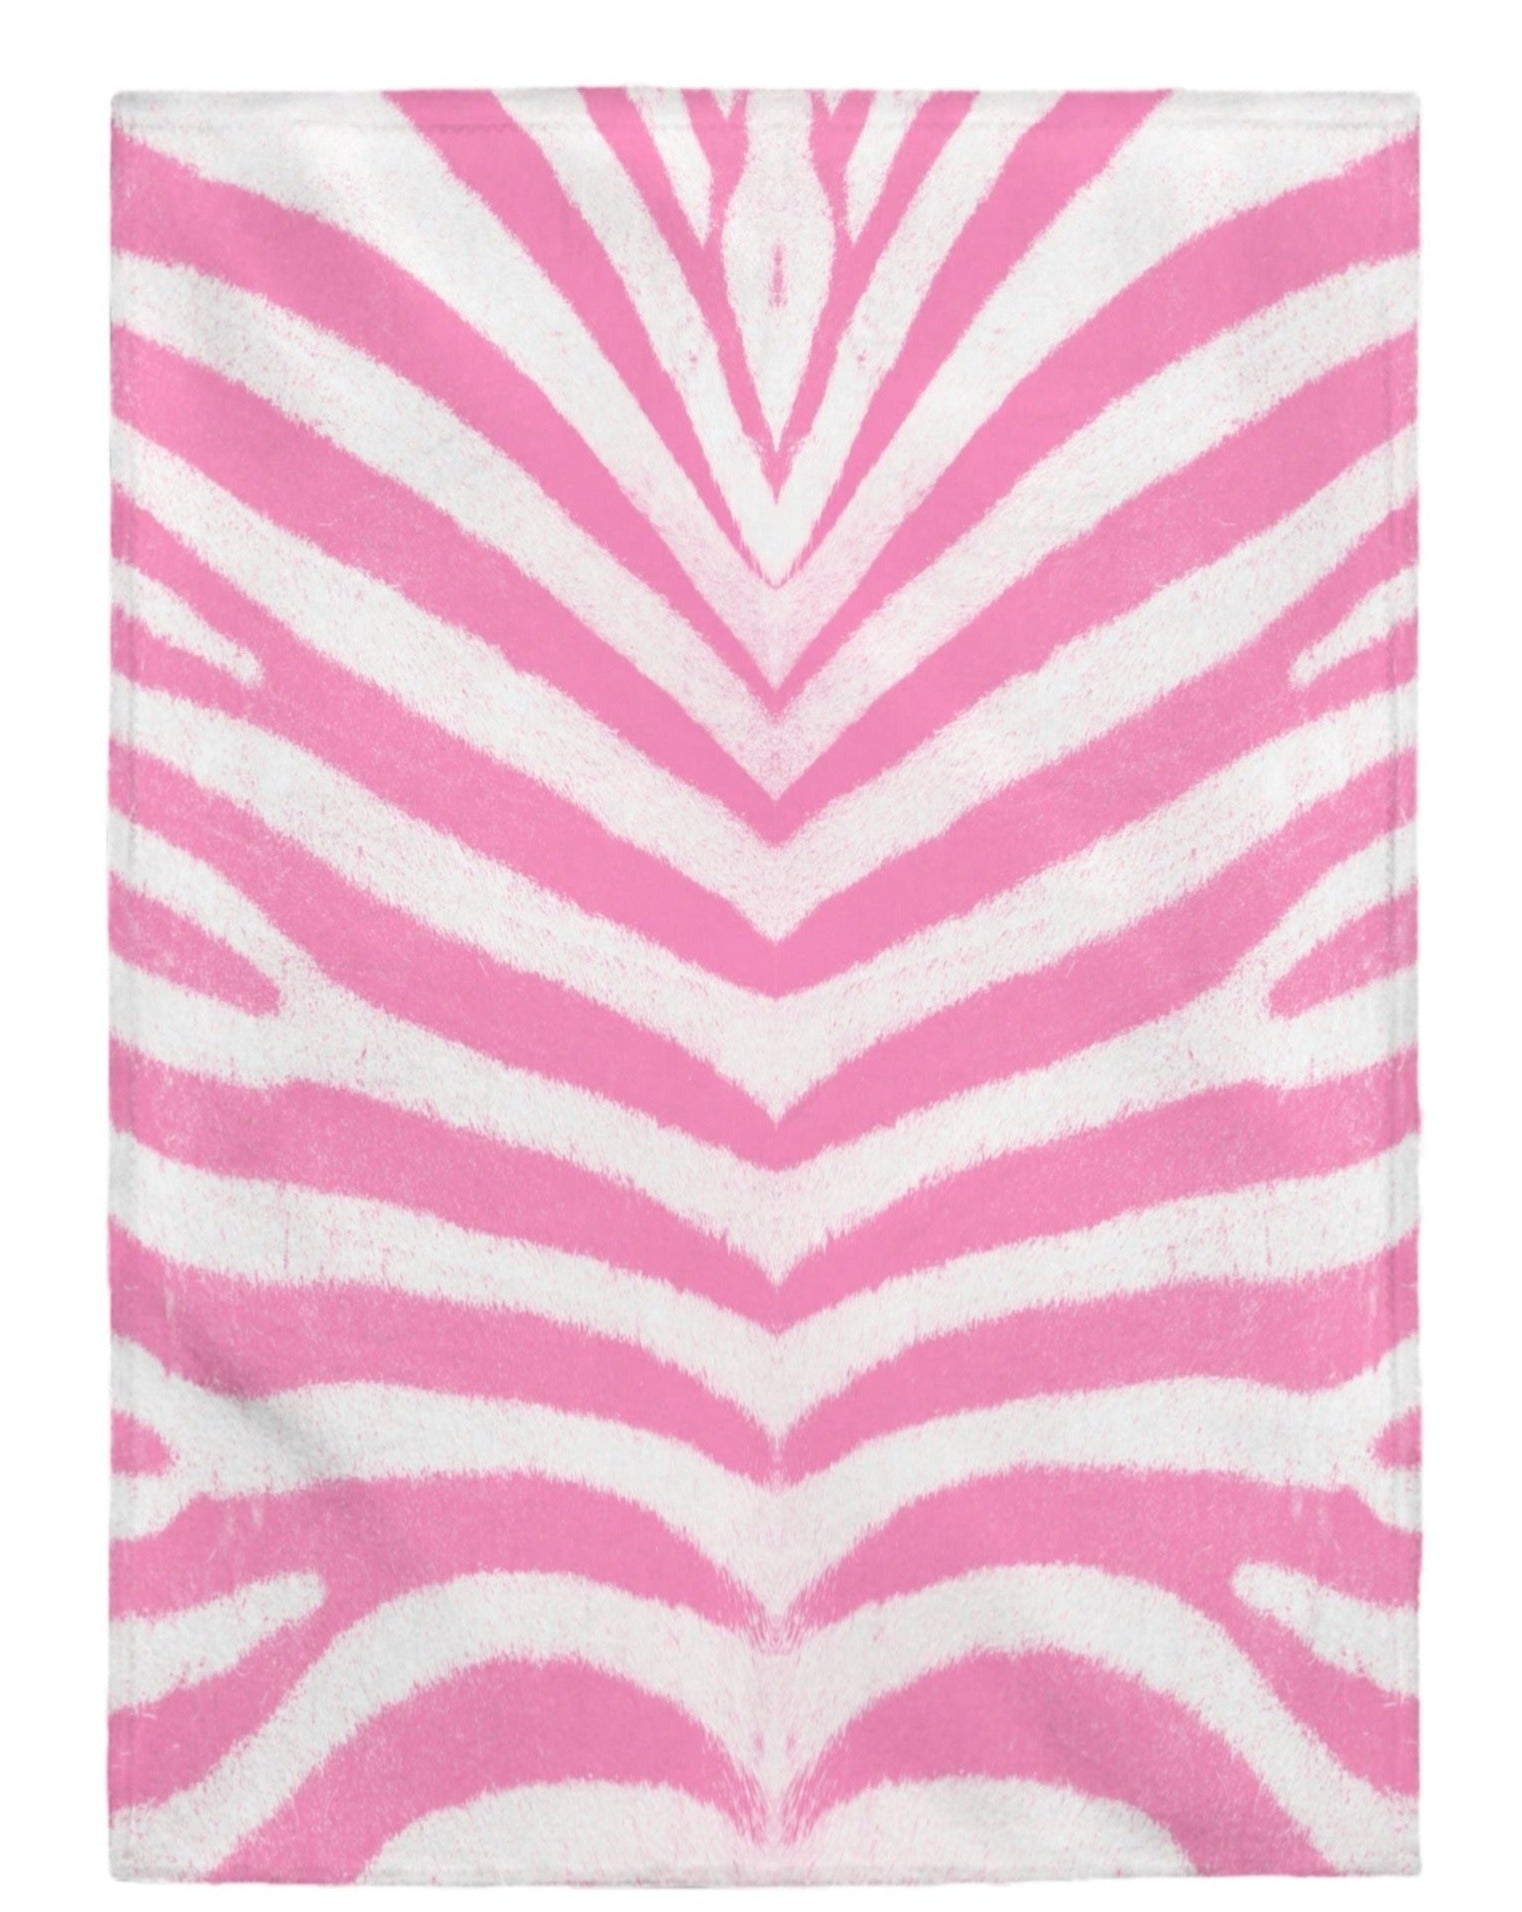 PINK AND WHITE STRIPED PLUSH BLANKET - BRYKNOLO LLC All Over Prints 30" × 40"